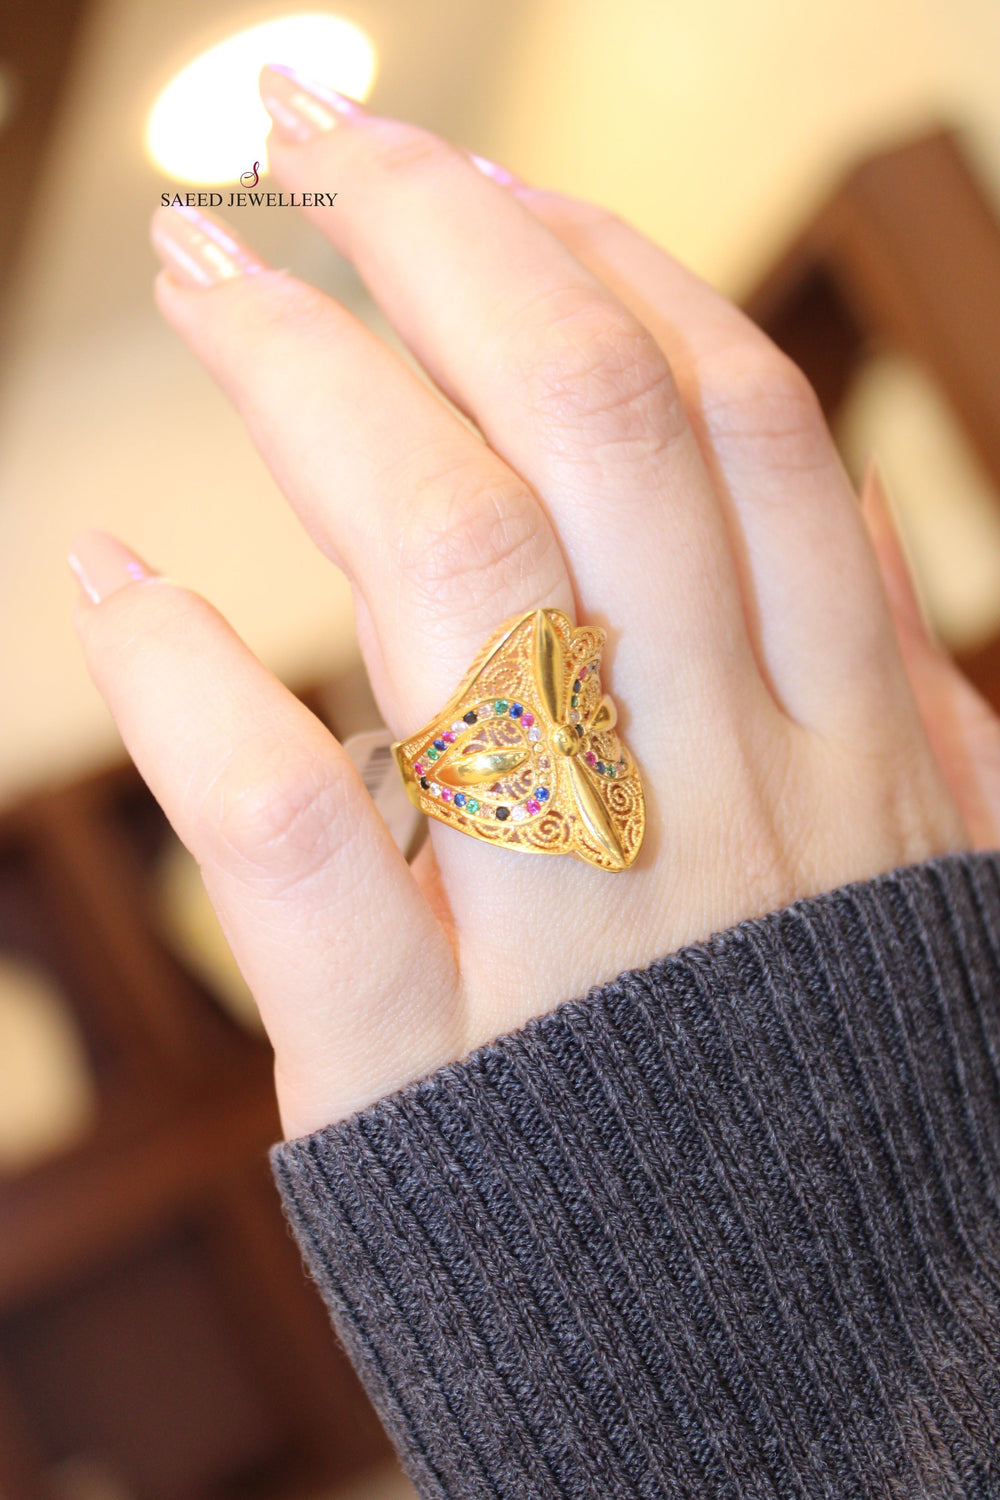 21K Fancy Ring Made of 21K Yellow Gold by Saeed Jewelry-16943